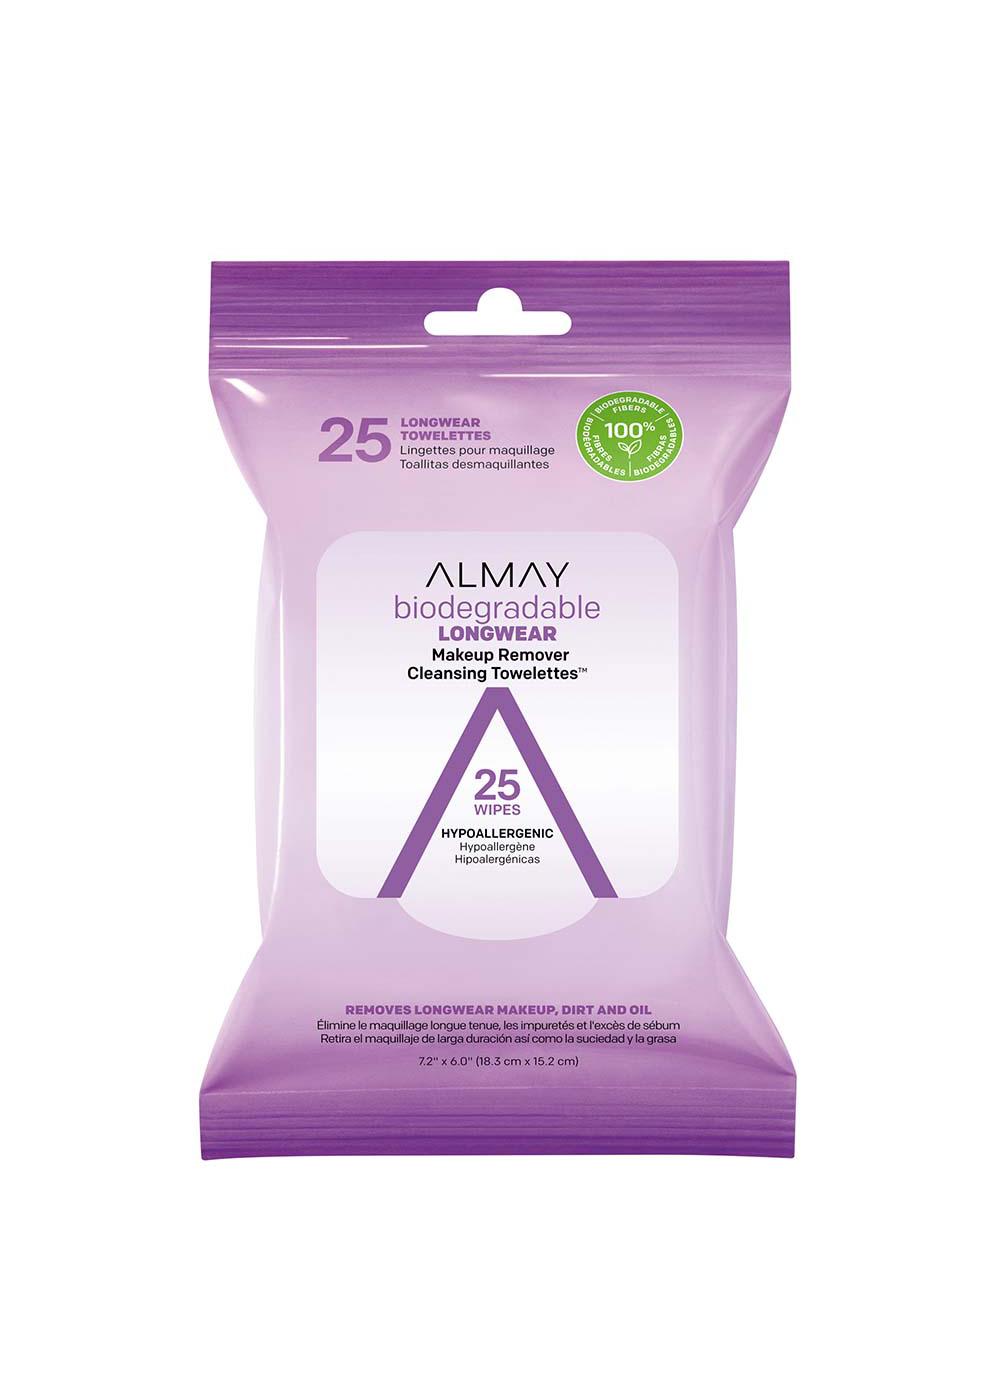 Almay Biodegradable Longwear Makeup Remover Cleansing Towelettes, Hypoallergenic, Cruelty Free, Fragrance free, Dermatologist Tested; image 1 of 3